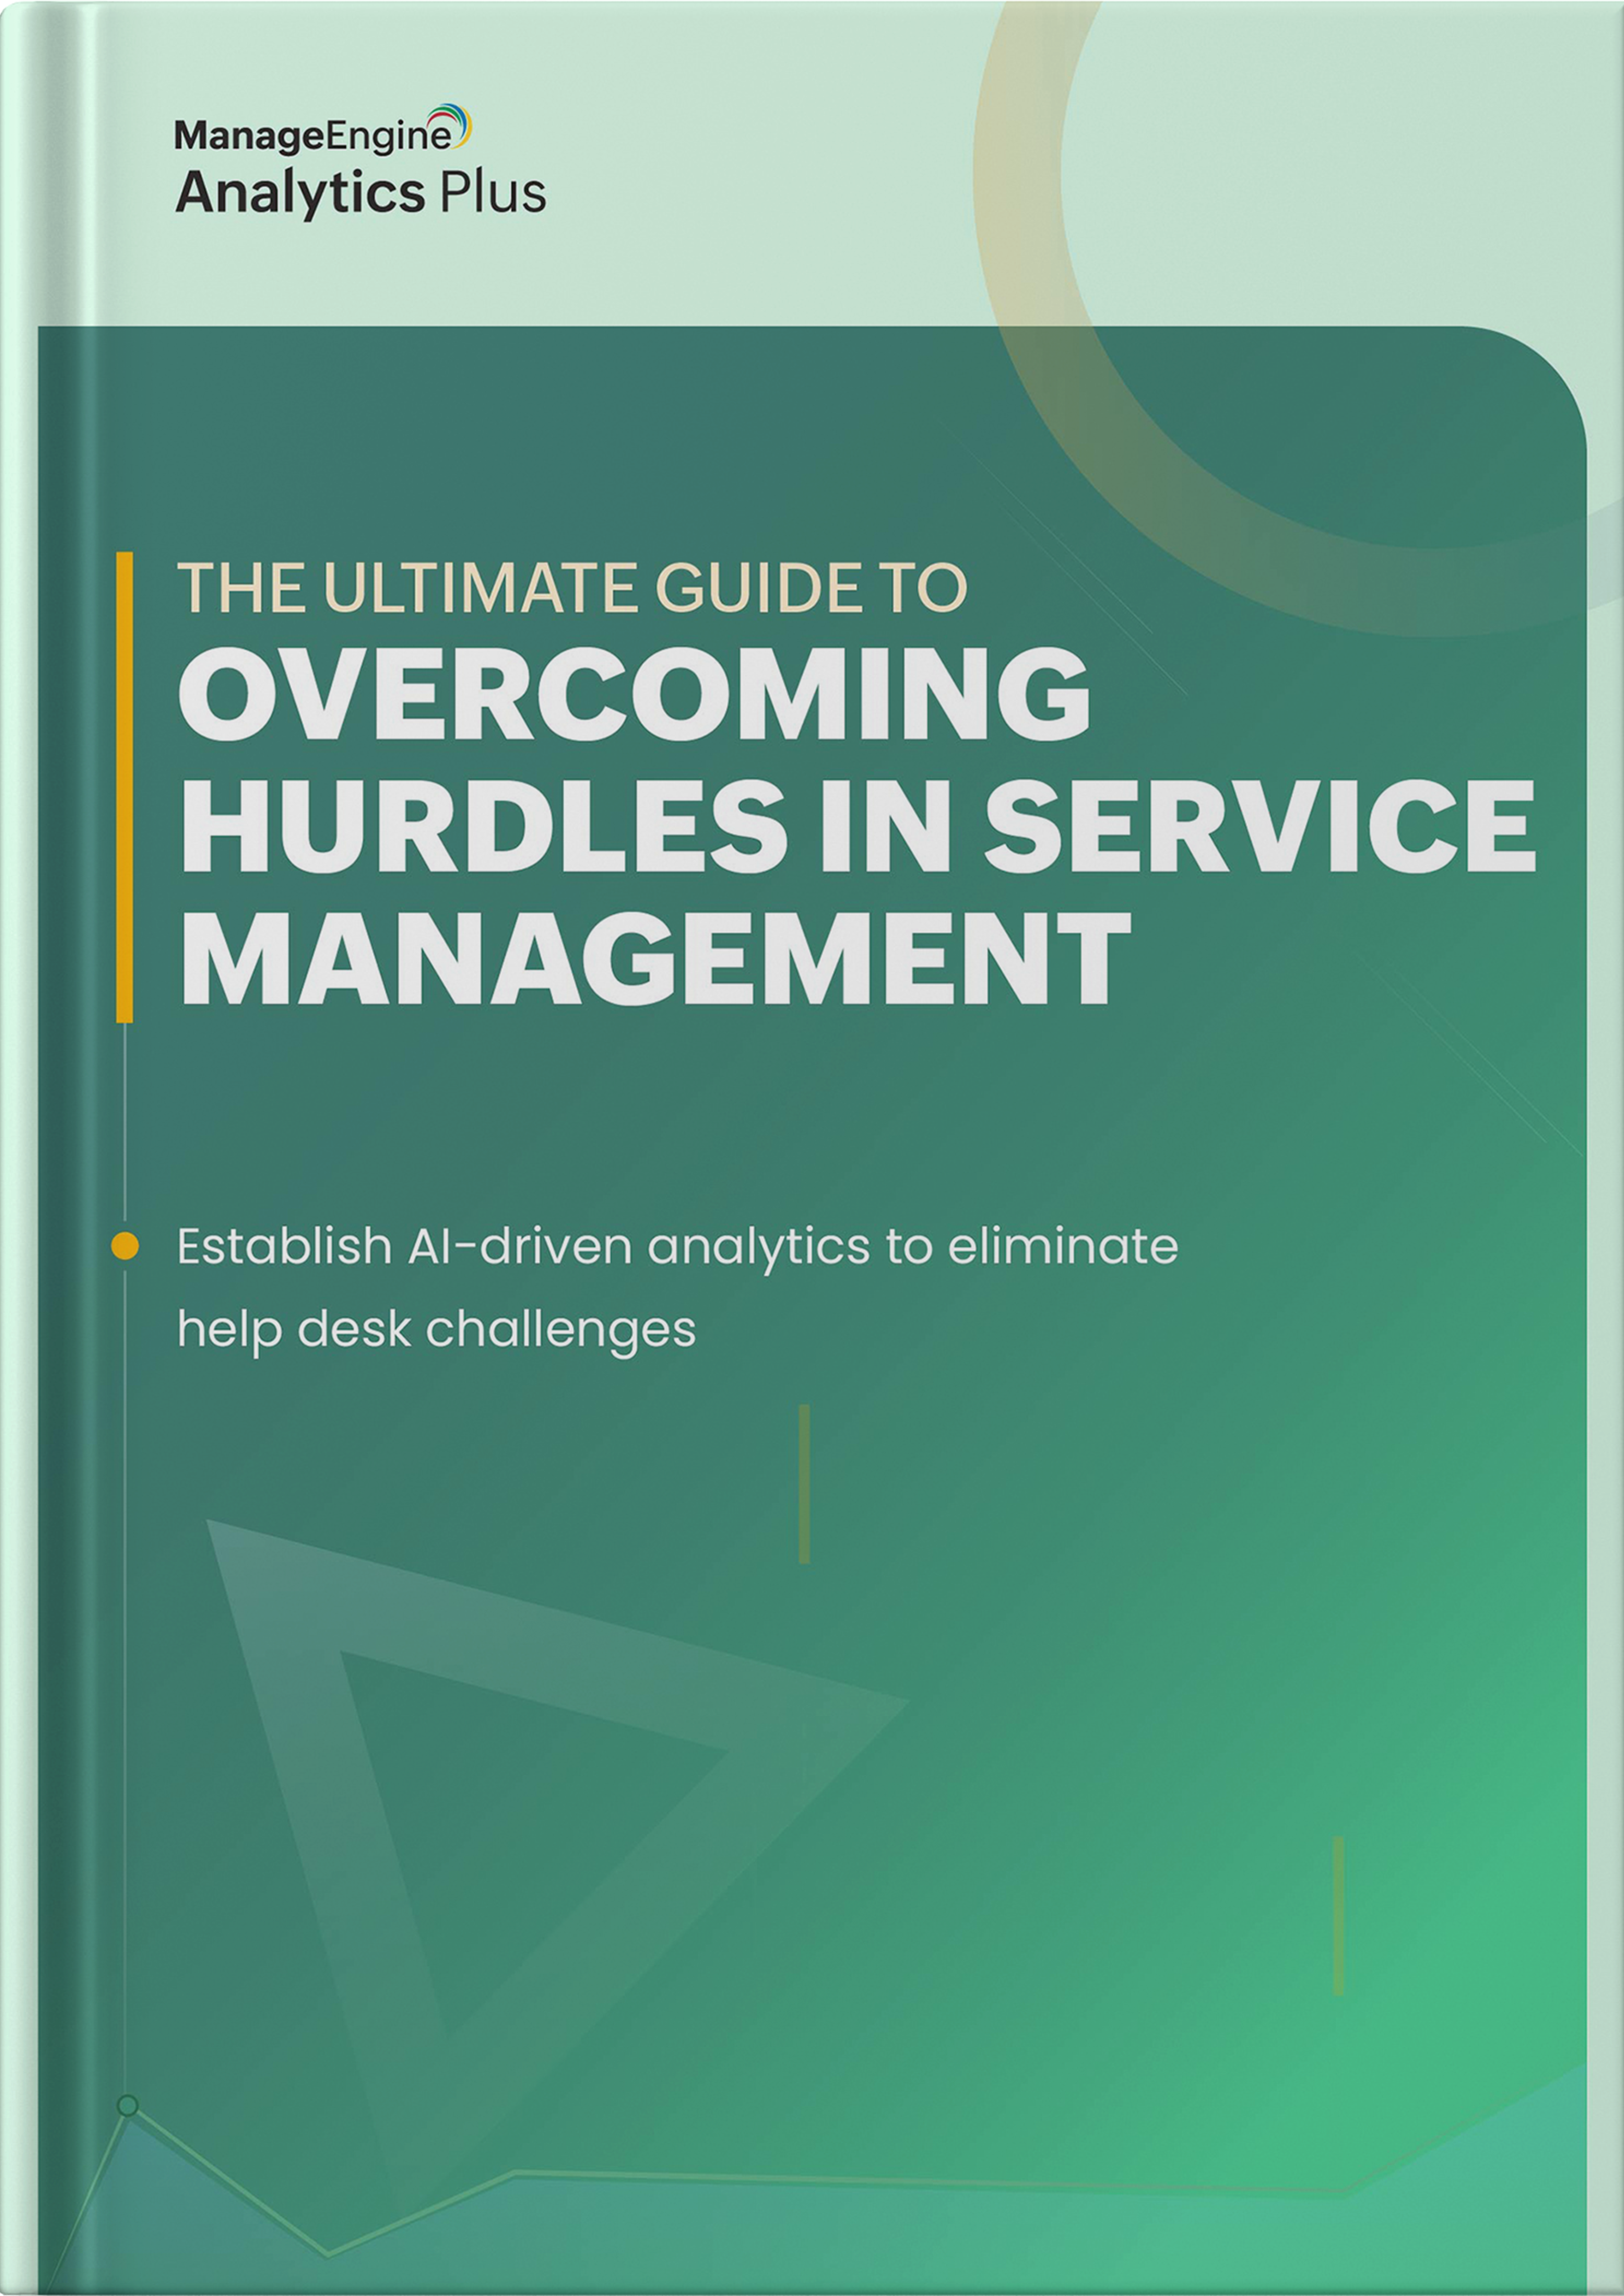 The ultimate guide to overcoming help desk hurdles